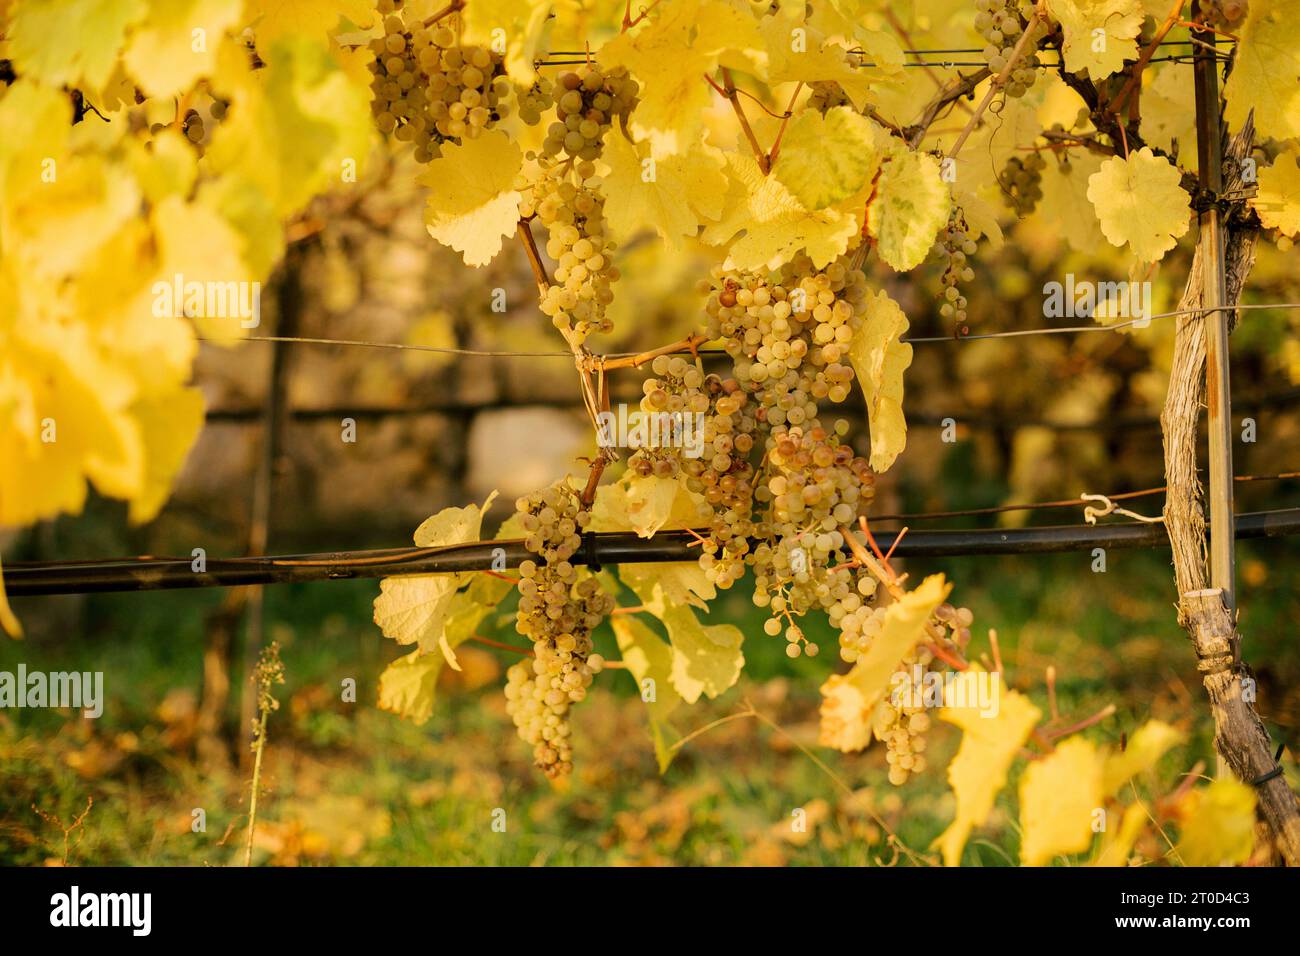 Green grape before harvesting with yellow leaves.Grape field growing for wine. Autumn scenery with wineyard rows. Stock Photo